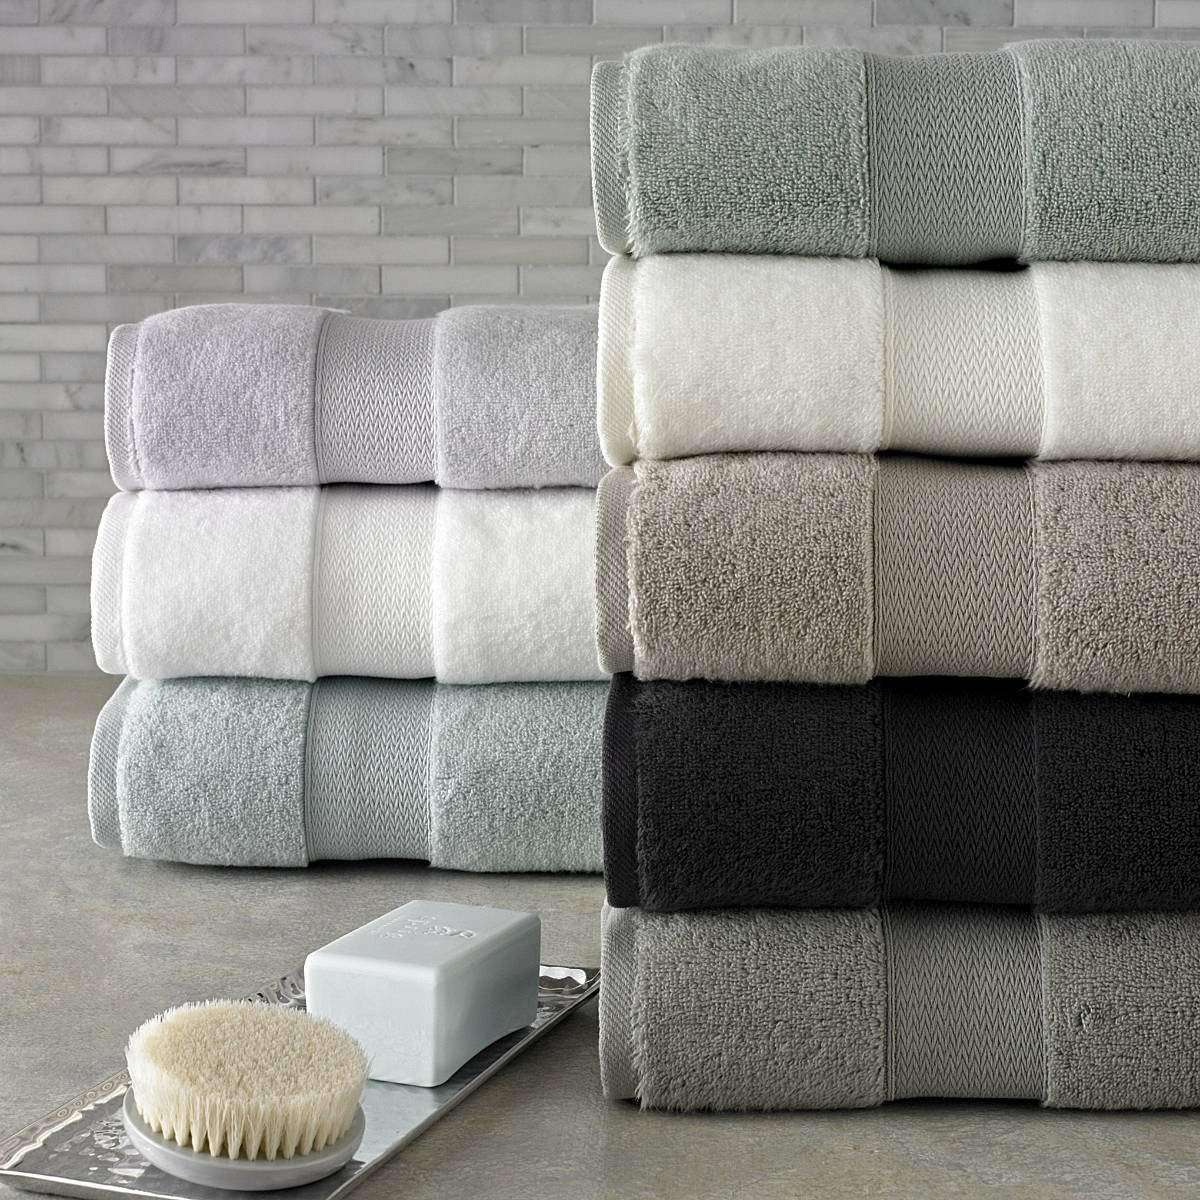 Borso Combed Turkish Cotton Towels  Shop Luxury Bedding and Bath at Luxor  Linens